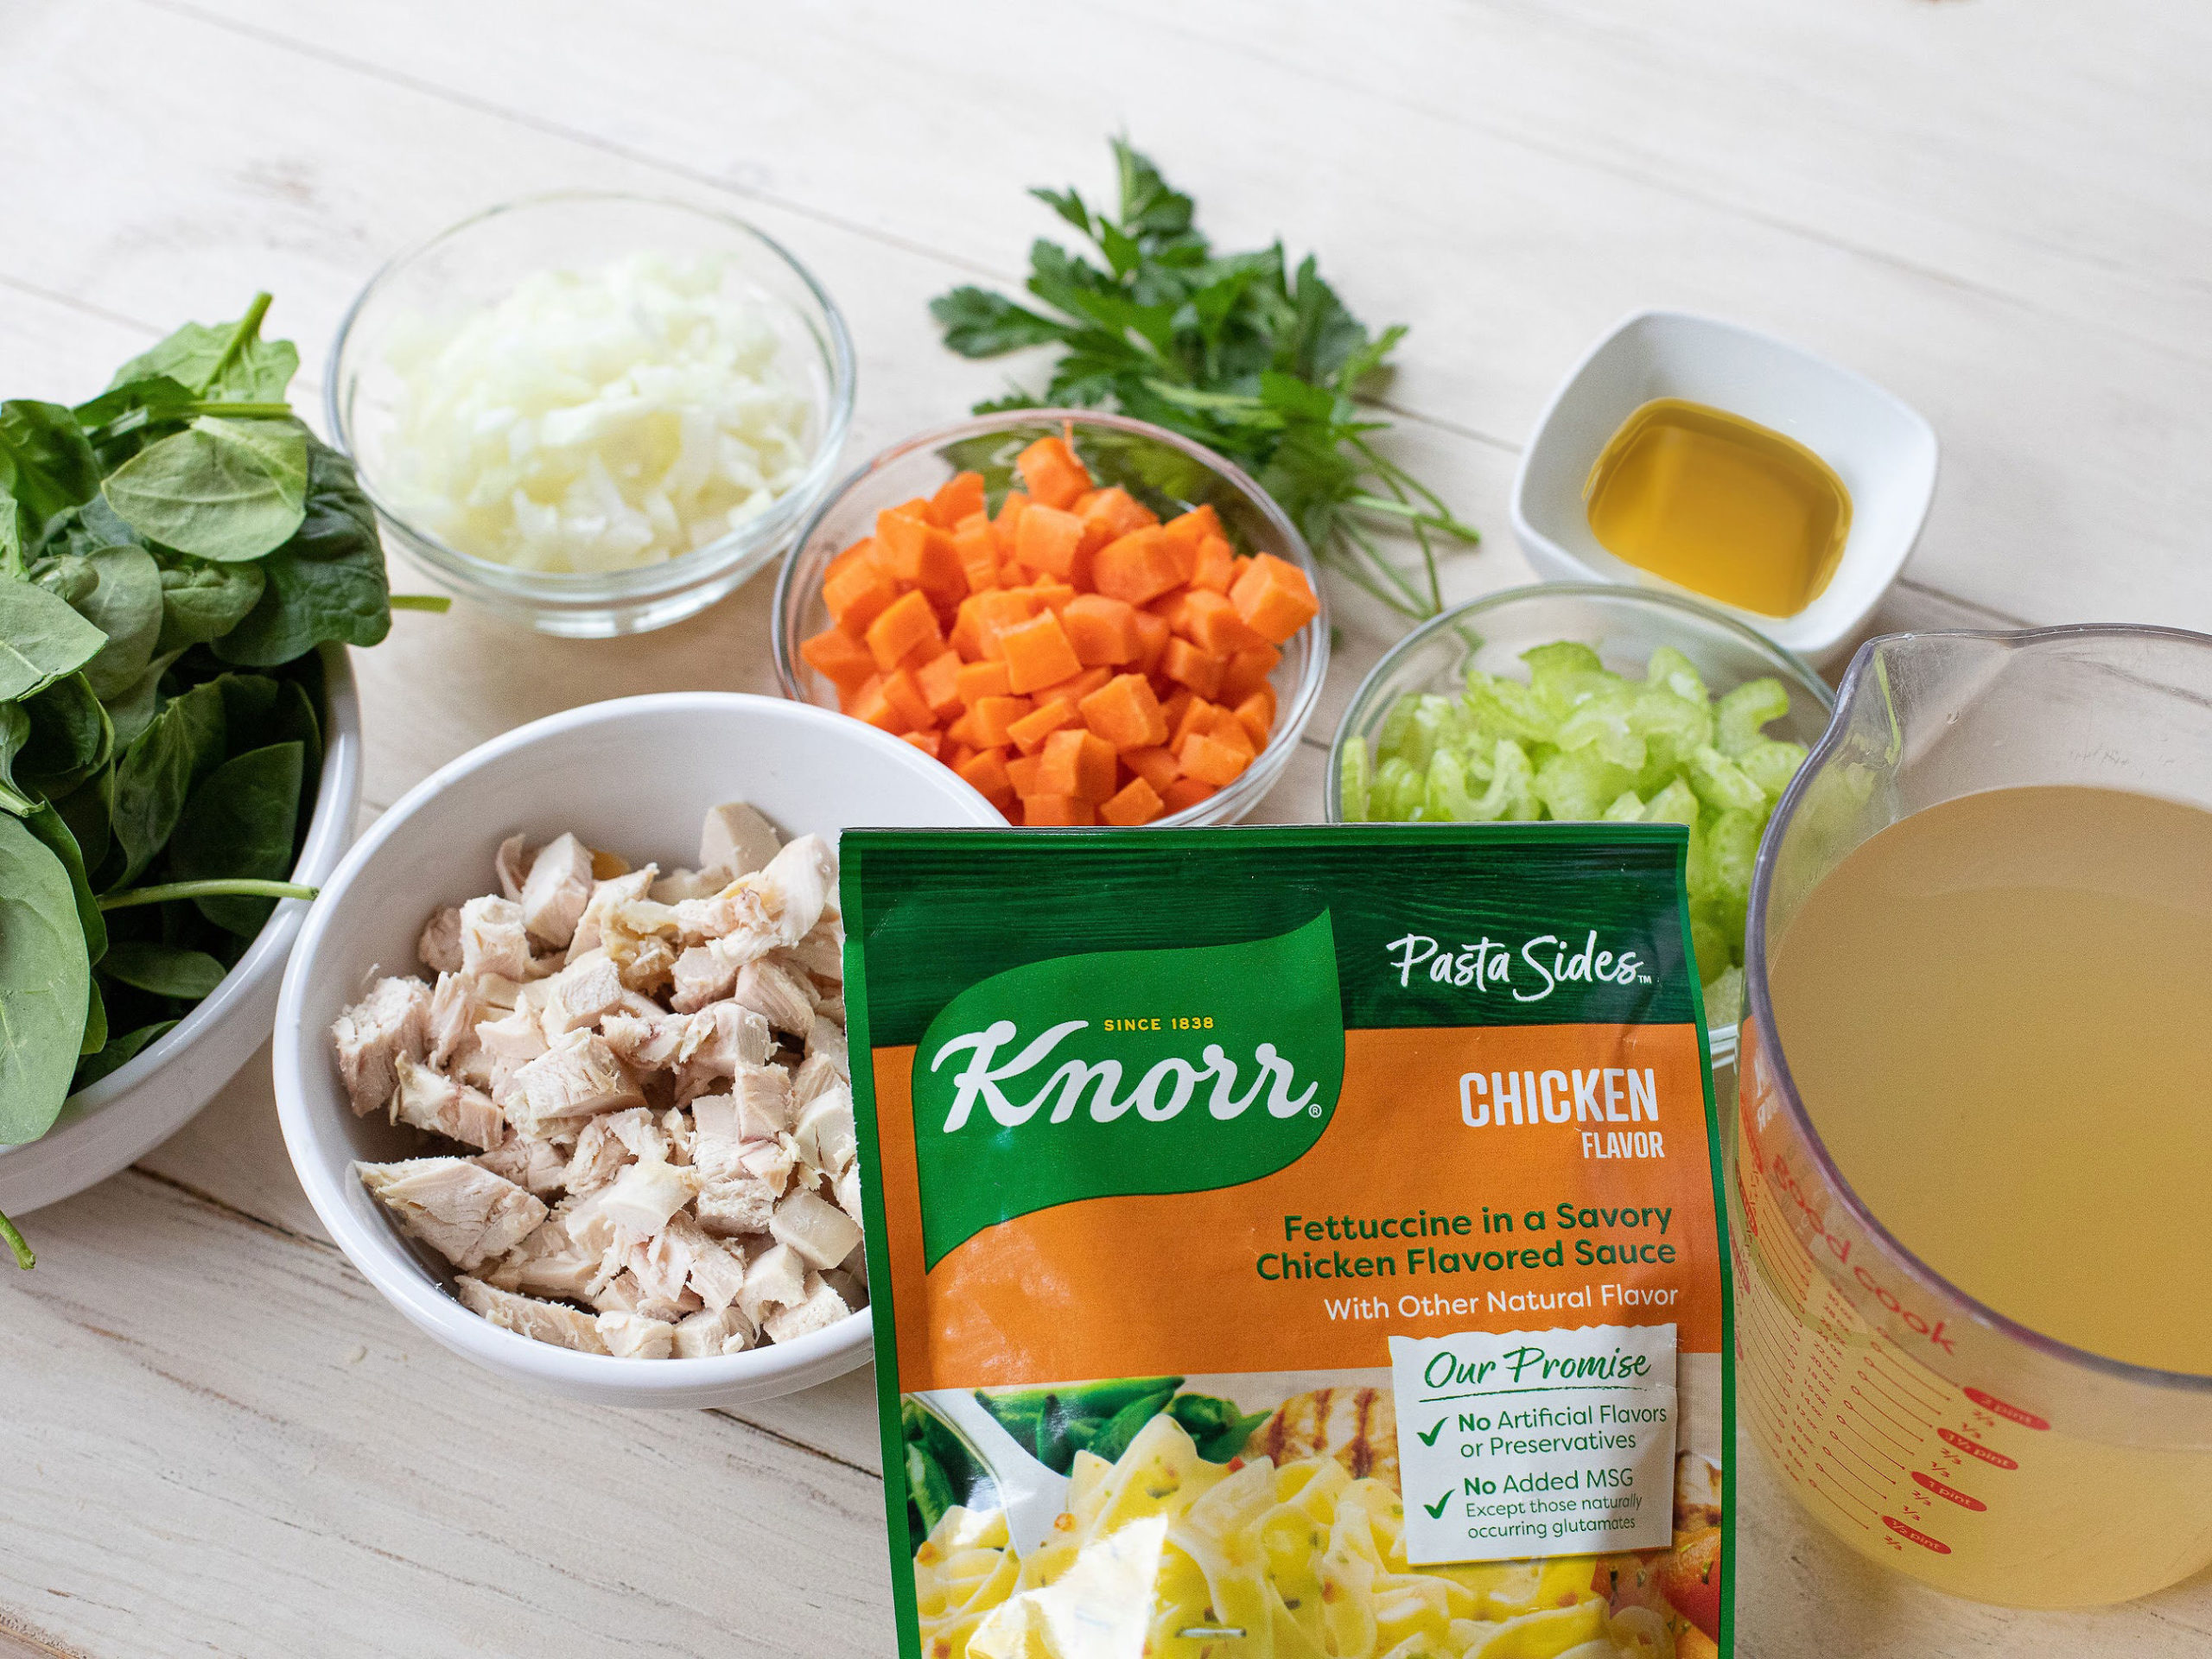 Try My Short Cut Chicken Noodle Soup Made With Knorr Sides & Save Now At Publix on I Heart Publix 3